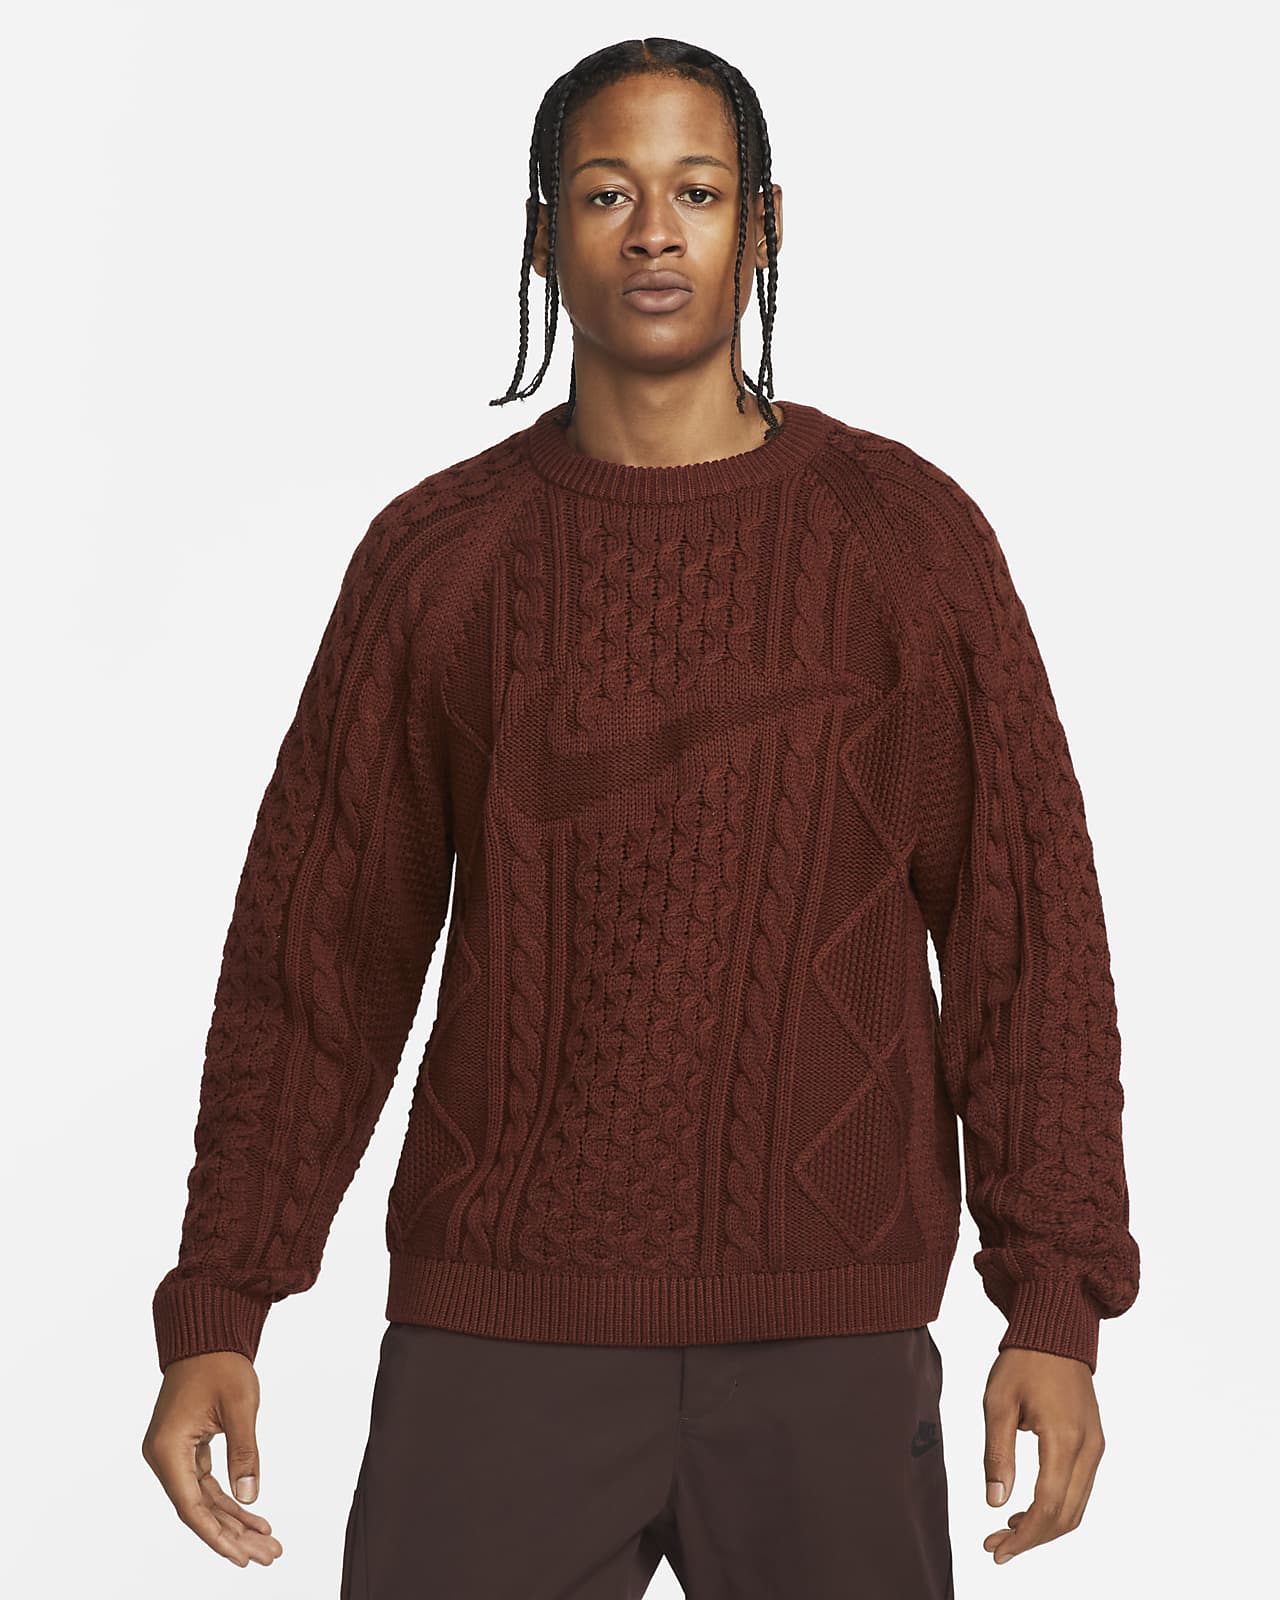 Nike Life Men's Cable-Knit Jumper. Nike NZ